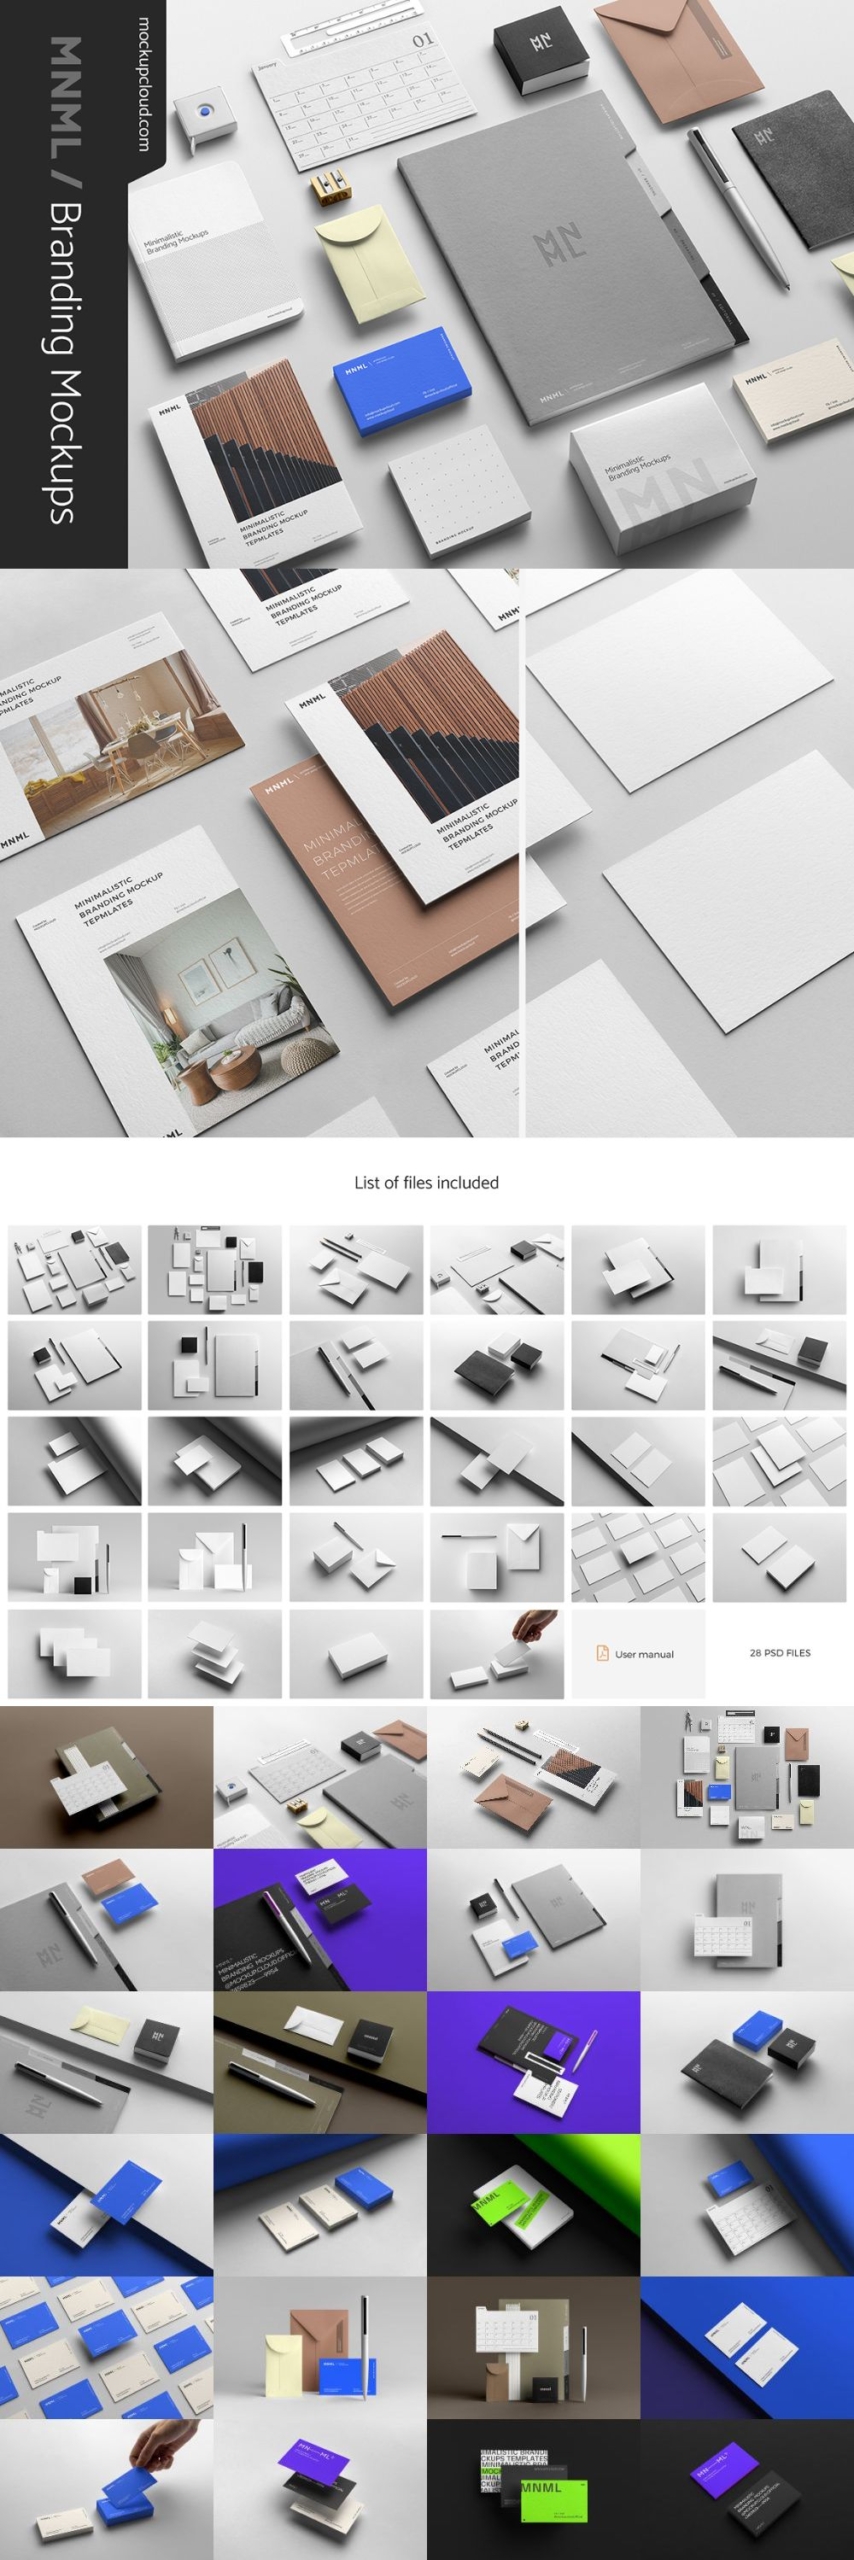 Download The 400+ Magnificent Mockups Collection | つくるデポ